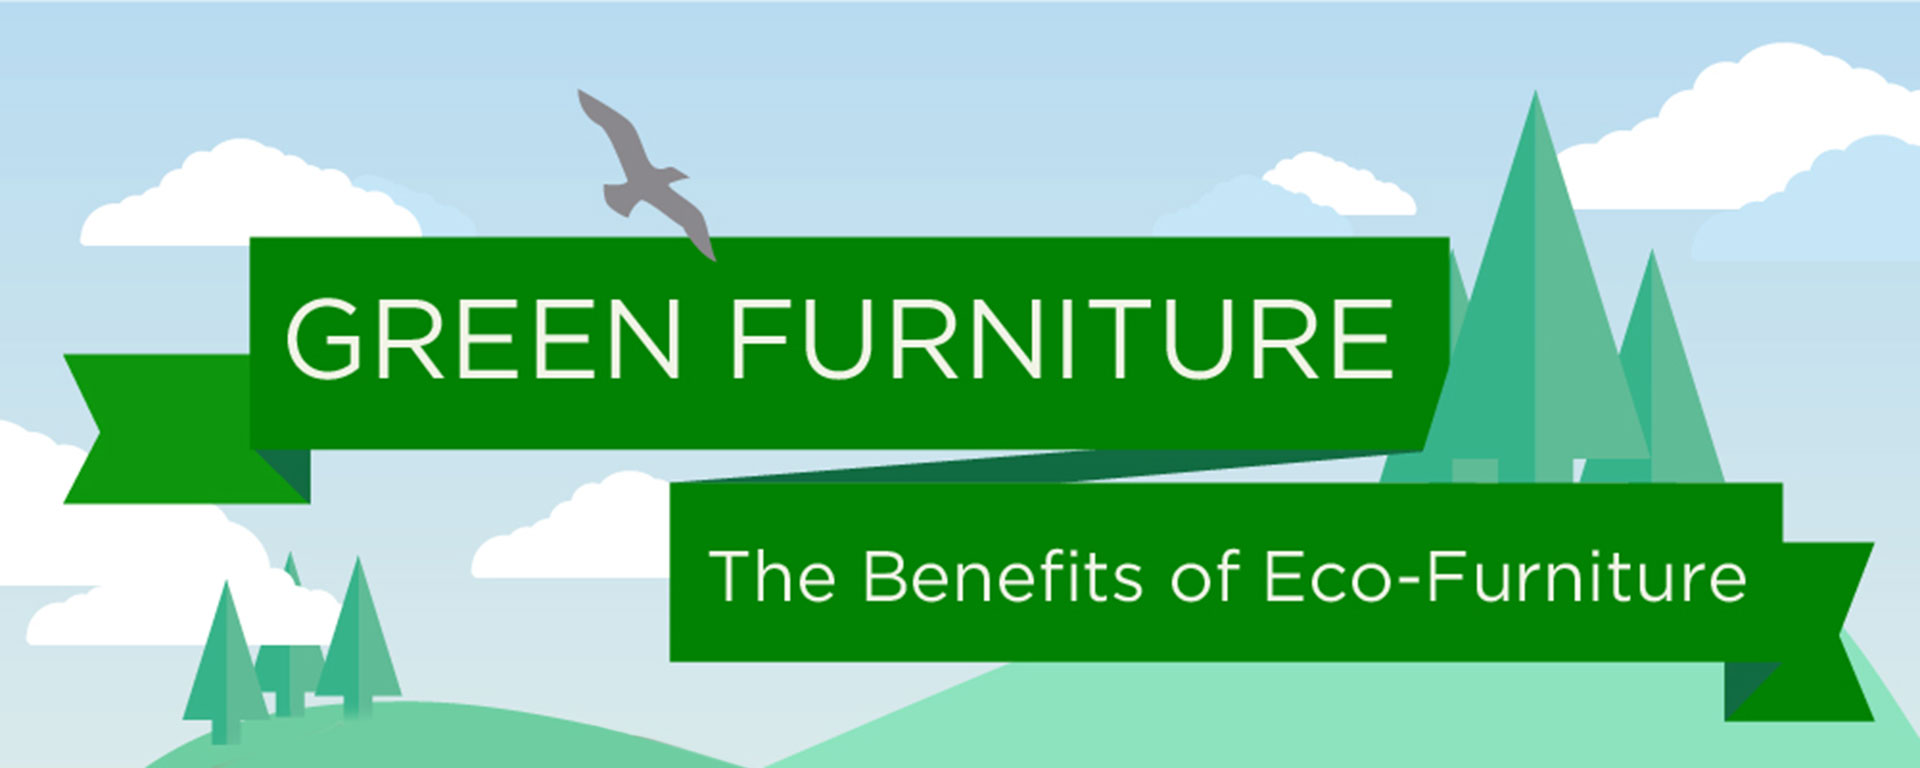 green-furniture-infographic-trex-outdoor-furniture-FEATURED